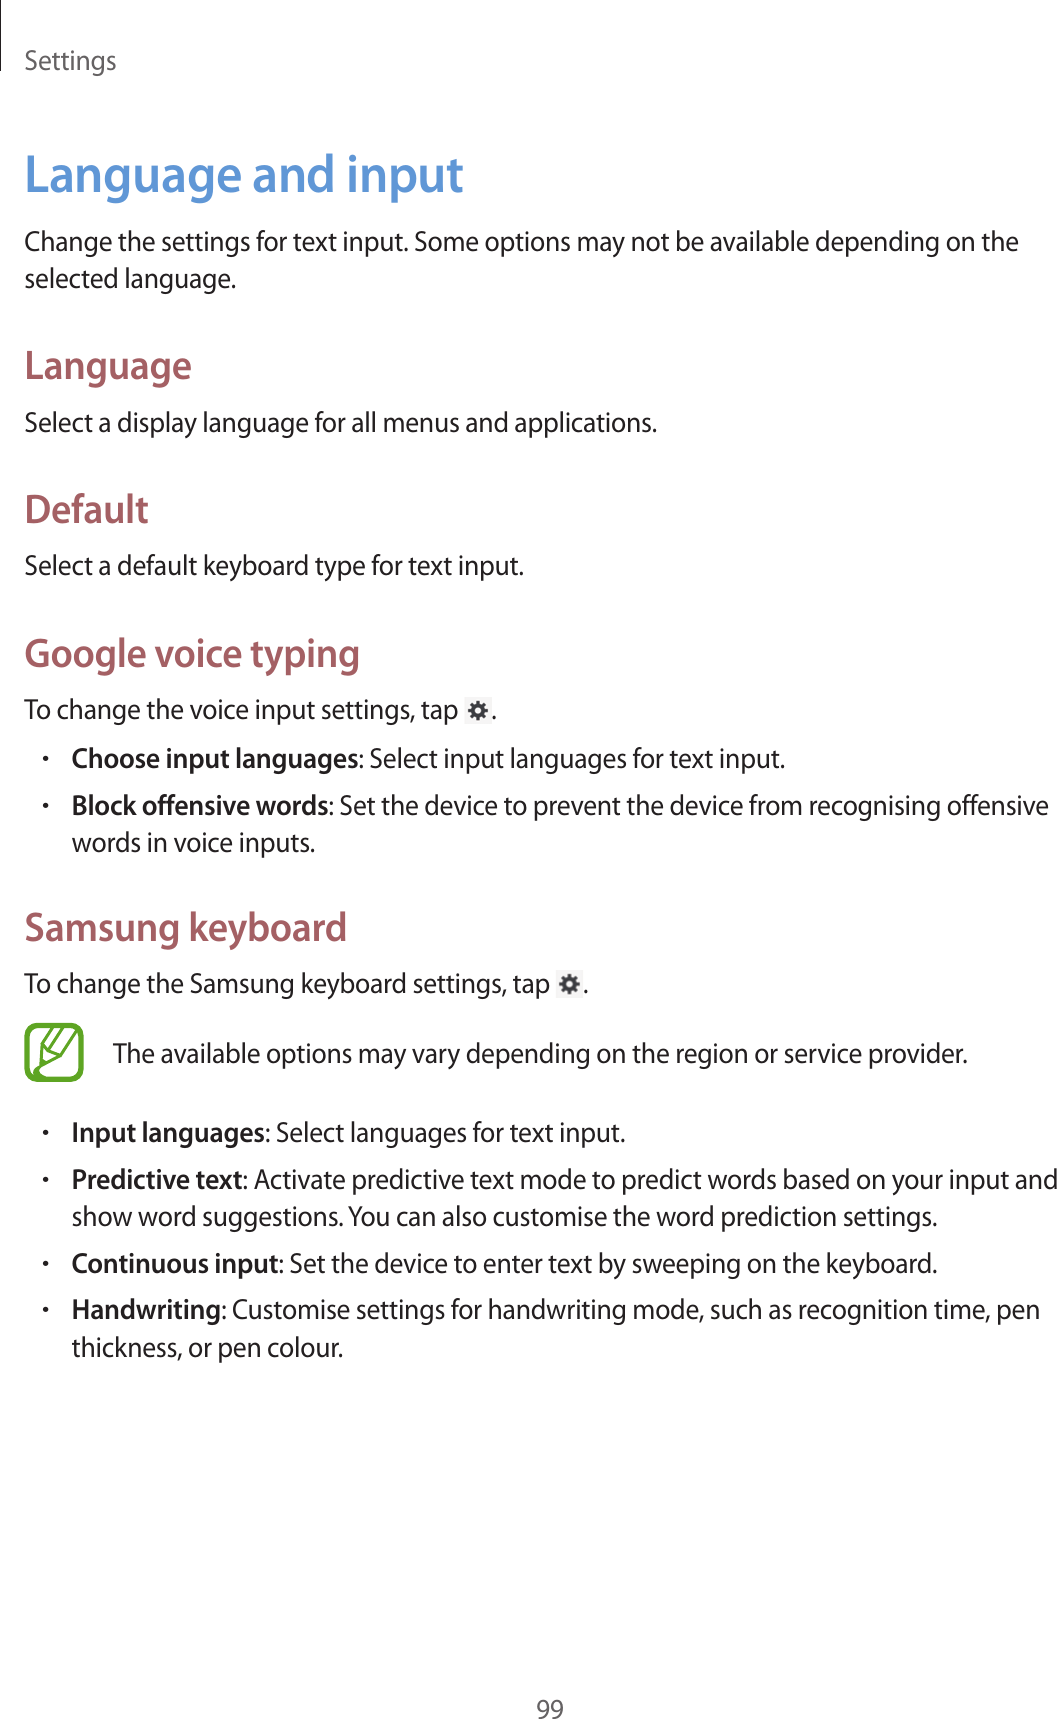 Settings99Language and inputChange the settings for text input. Some options may not be available depending on the selected language.LanguageSelect a display language for all menus and applications.DefaultSelect a default keyboard type for text input.Google voice typingTo change the voice input settings, tap  .•Choose input languages: Select input languages for text input.•Block offensive words: Set the device to prevent the device from recognising offensive words in voice inputs.Samsung keyboardTo change the Samsung keyboard settings, tap  .The available options may vary depending on the region or service provider.•Input languages: Select languages for text input.•Predictive text: Activate predictive text mode to predict words based on your input and show word suggestions. You can also customise the word prediction settings.•Continuous input: Set the device to enter text by sweeping on the keyboard.•Handwriting: Customise settings for handwriting mode, such as recognition time, pen thickness, or pen colour.